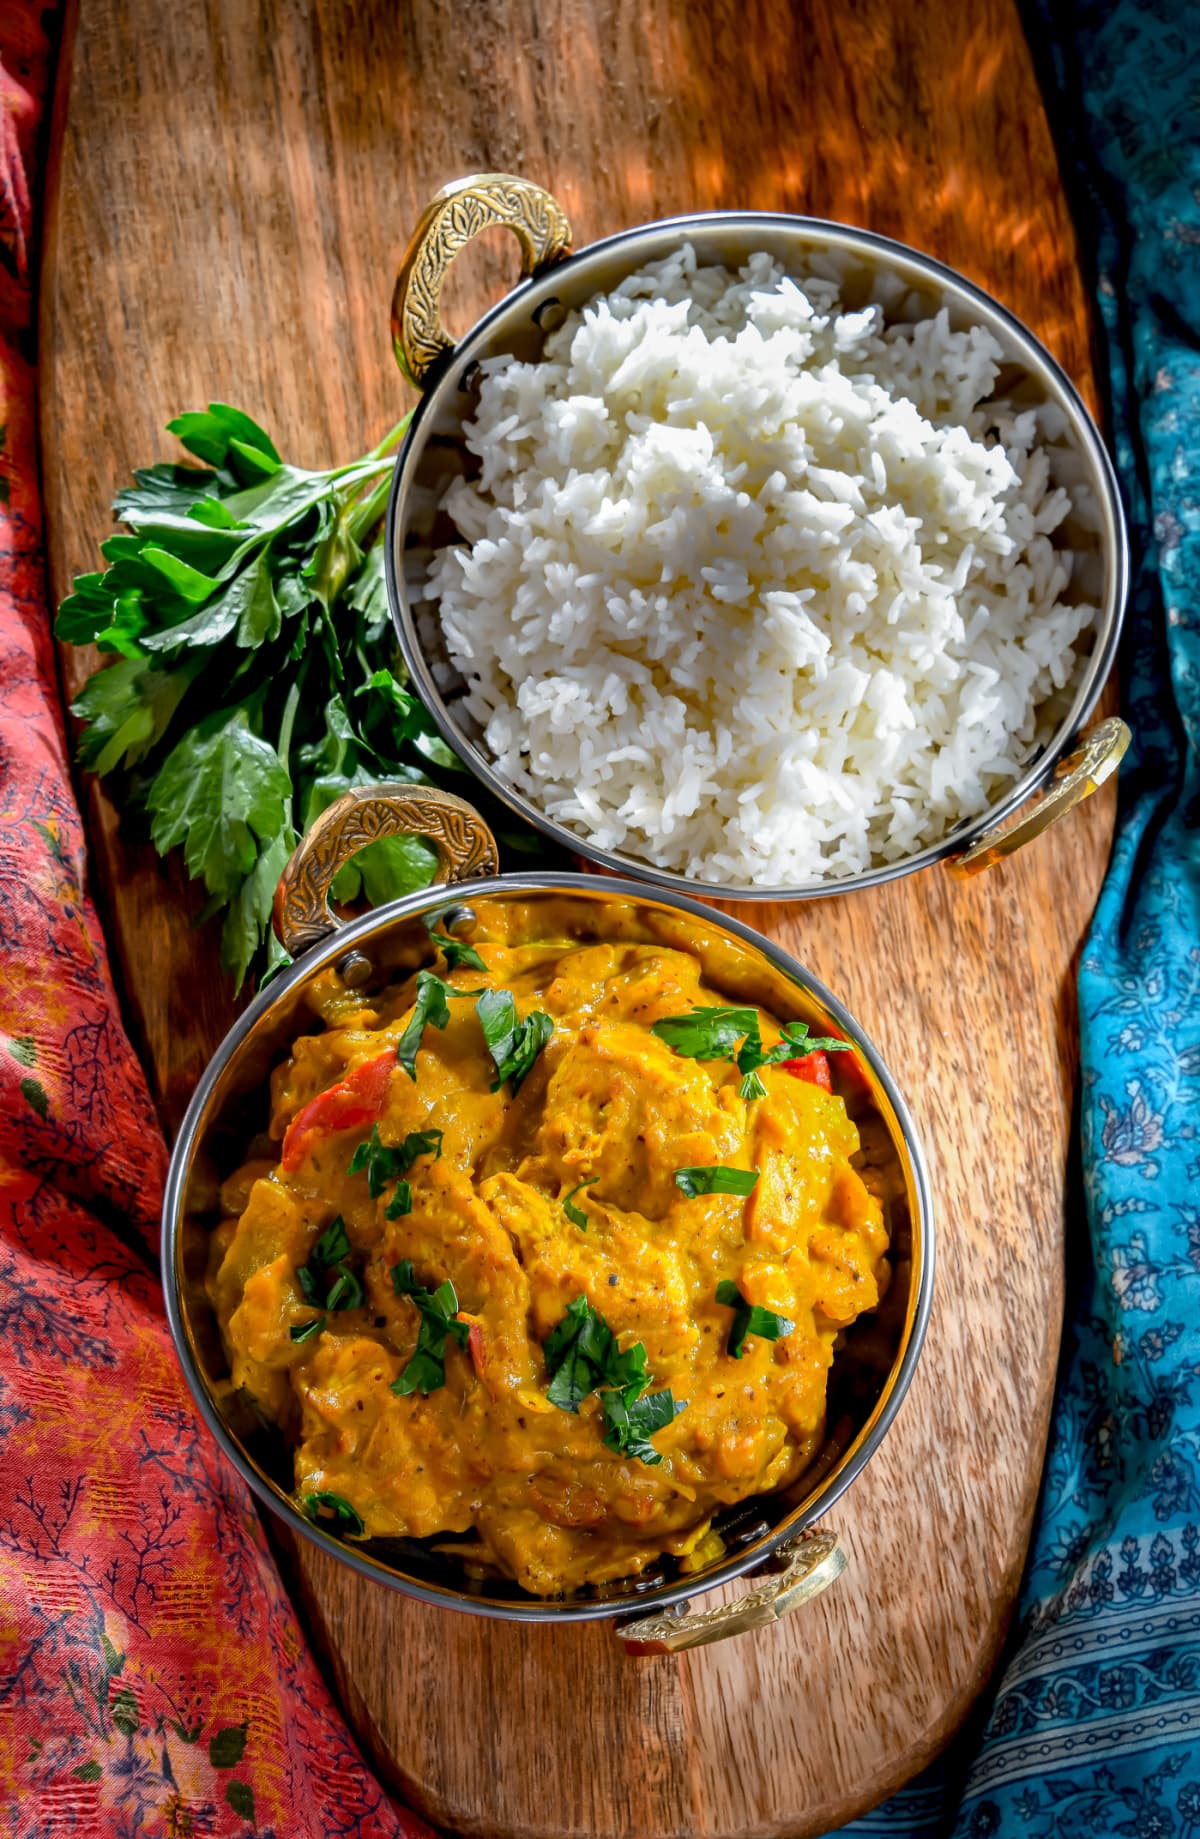 Curry chicken with rice served in original indian karahi pots.